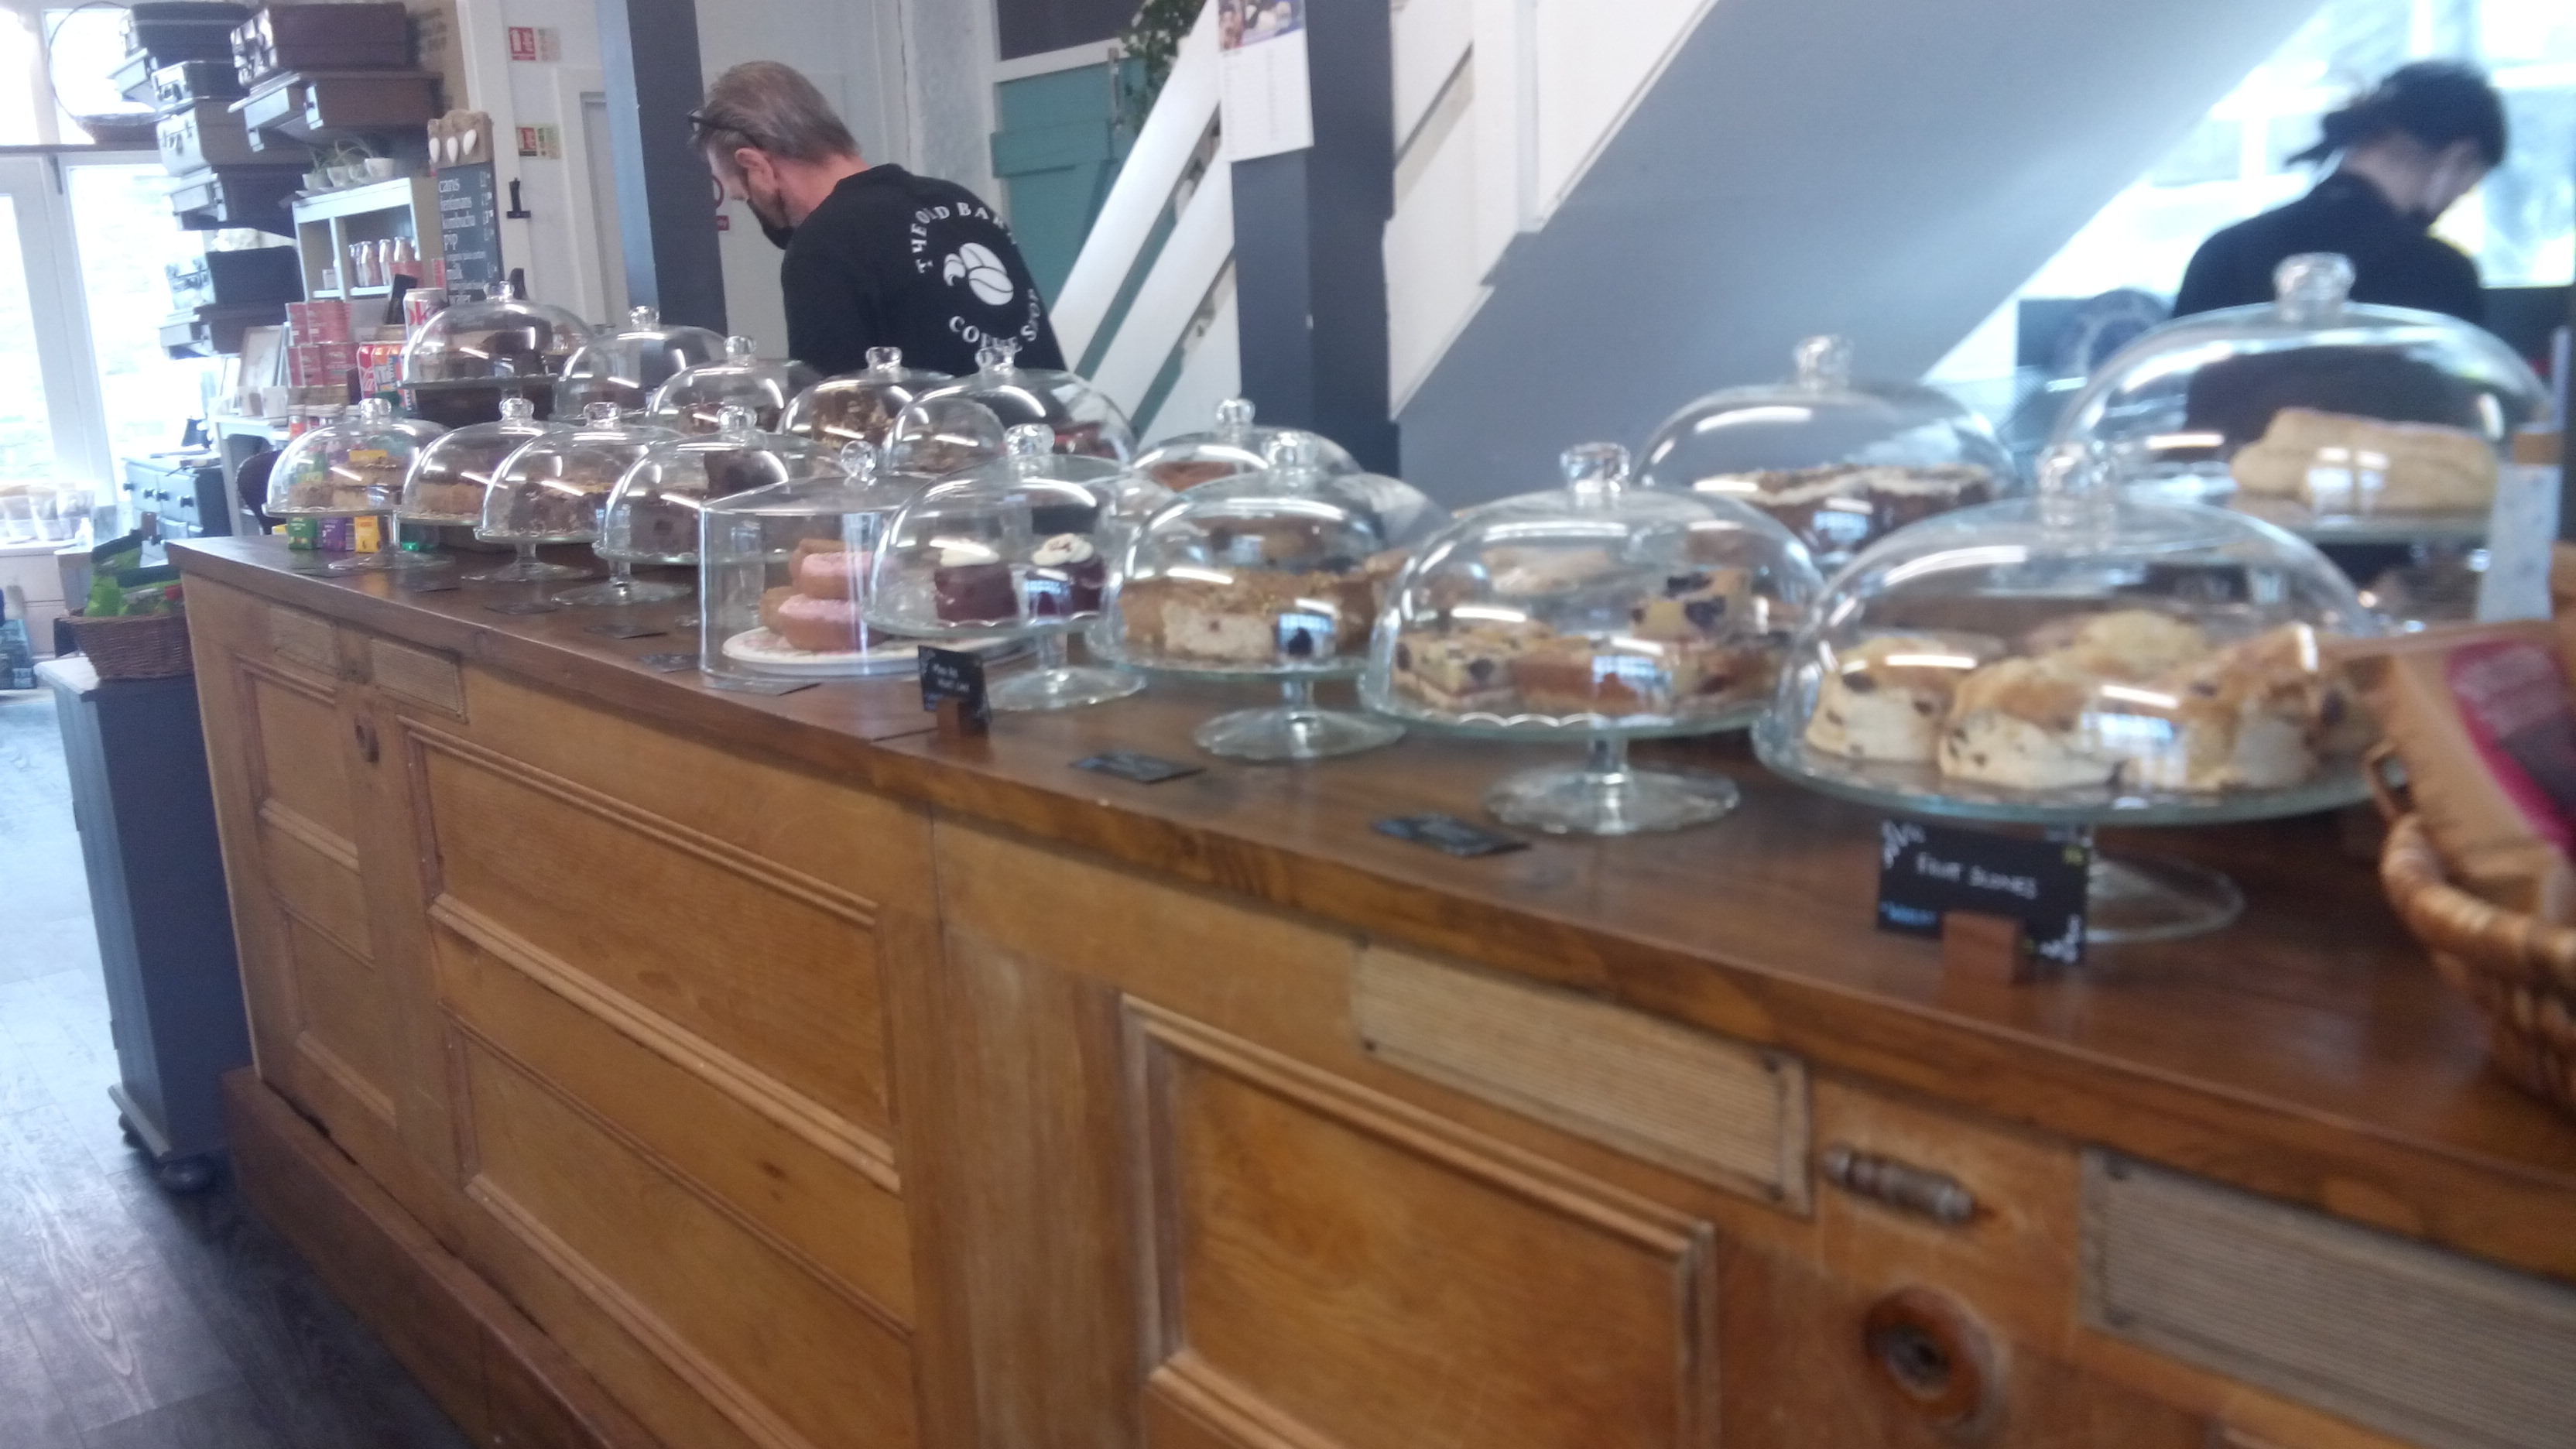 A wooden counter (made from old doors) supports an array of glass domes filled with cakes